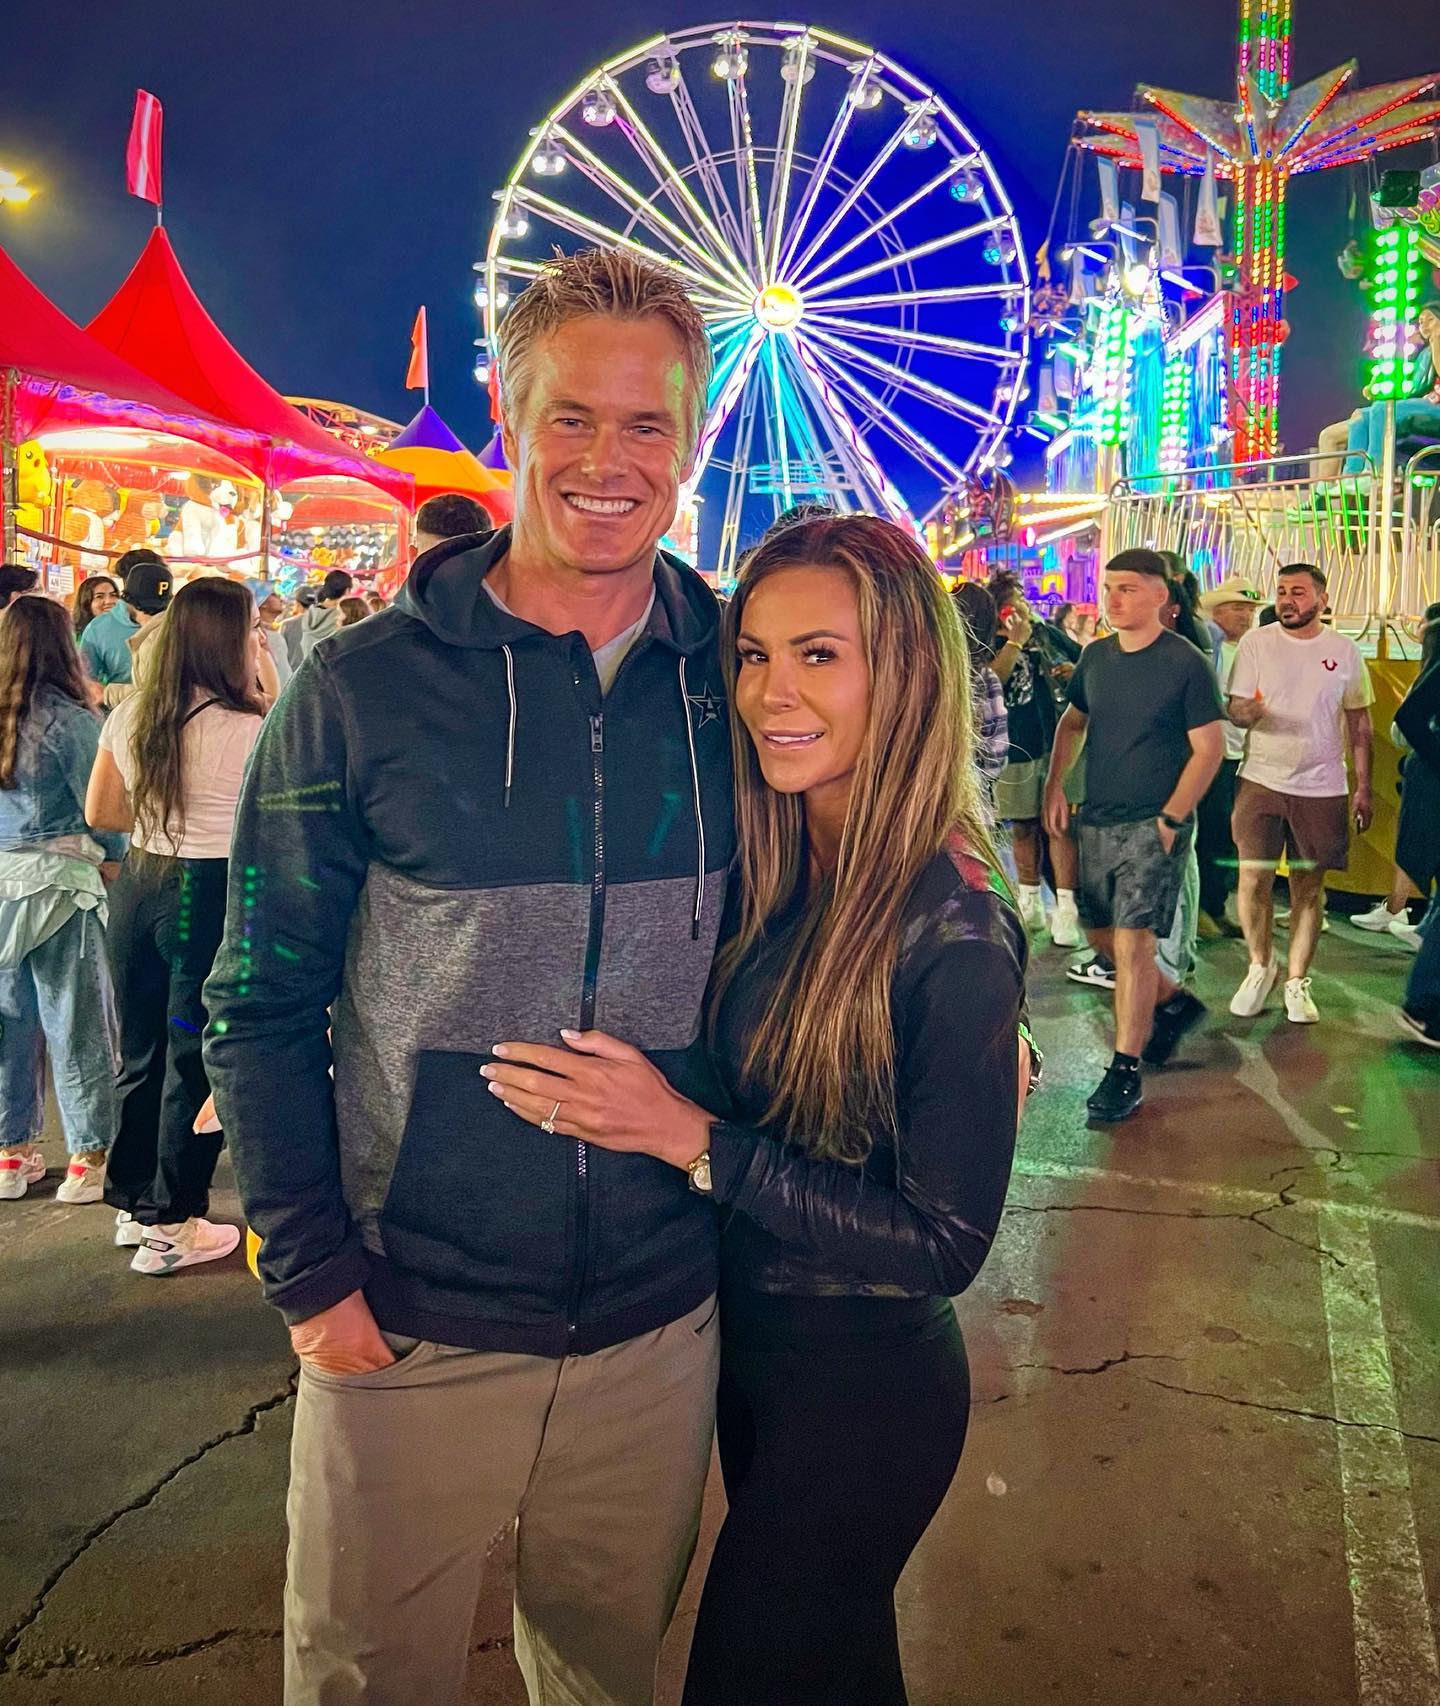 His fiancée Paige Press confirmed the heartbreaking news in emotional posts on Instagram